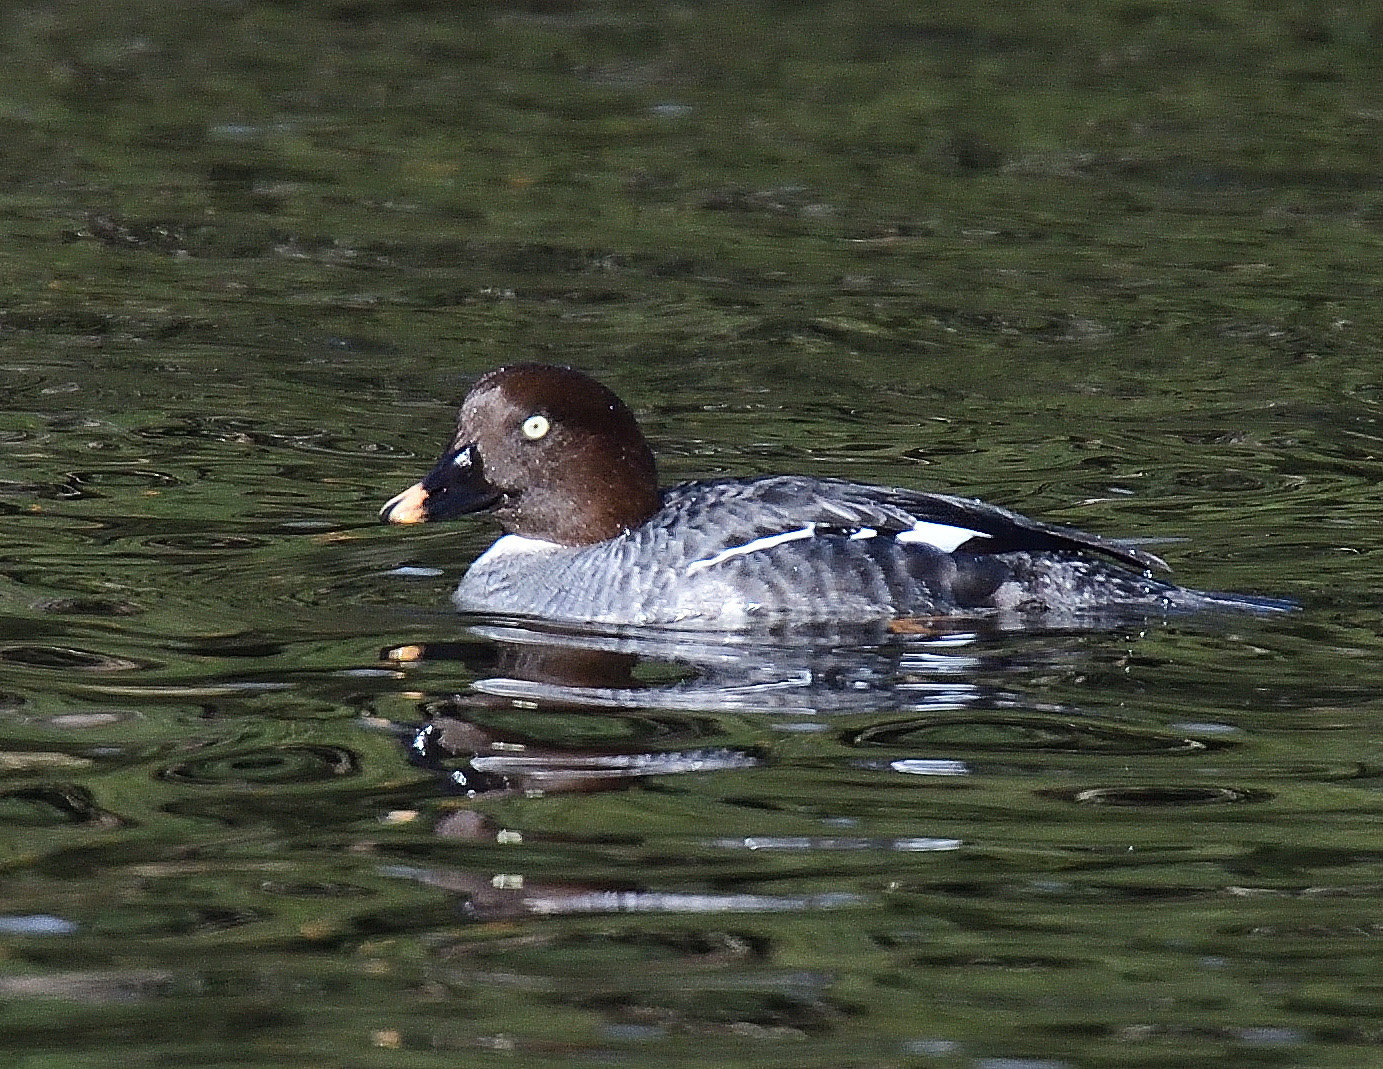 This female common goldeneye is a duck species only seen here during the winter. They breed up in the Northern U.S. and Canada come spring and summer. Like the common merganser and bufflehead, males have black and white plumage; the head shows some iridescent green at times in the sun. Goldeneyes feed mainly on invertebrates found on the bottom of bodies of water.